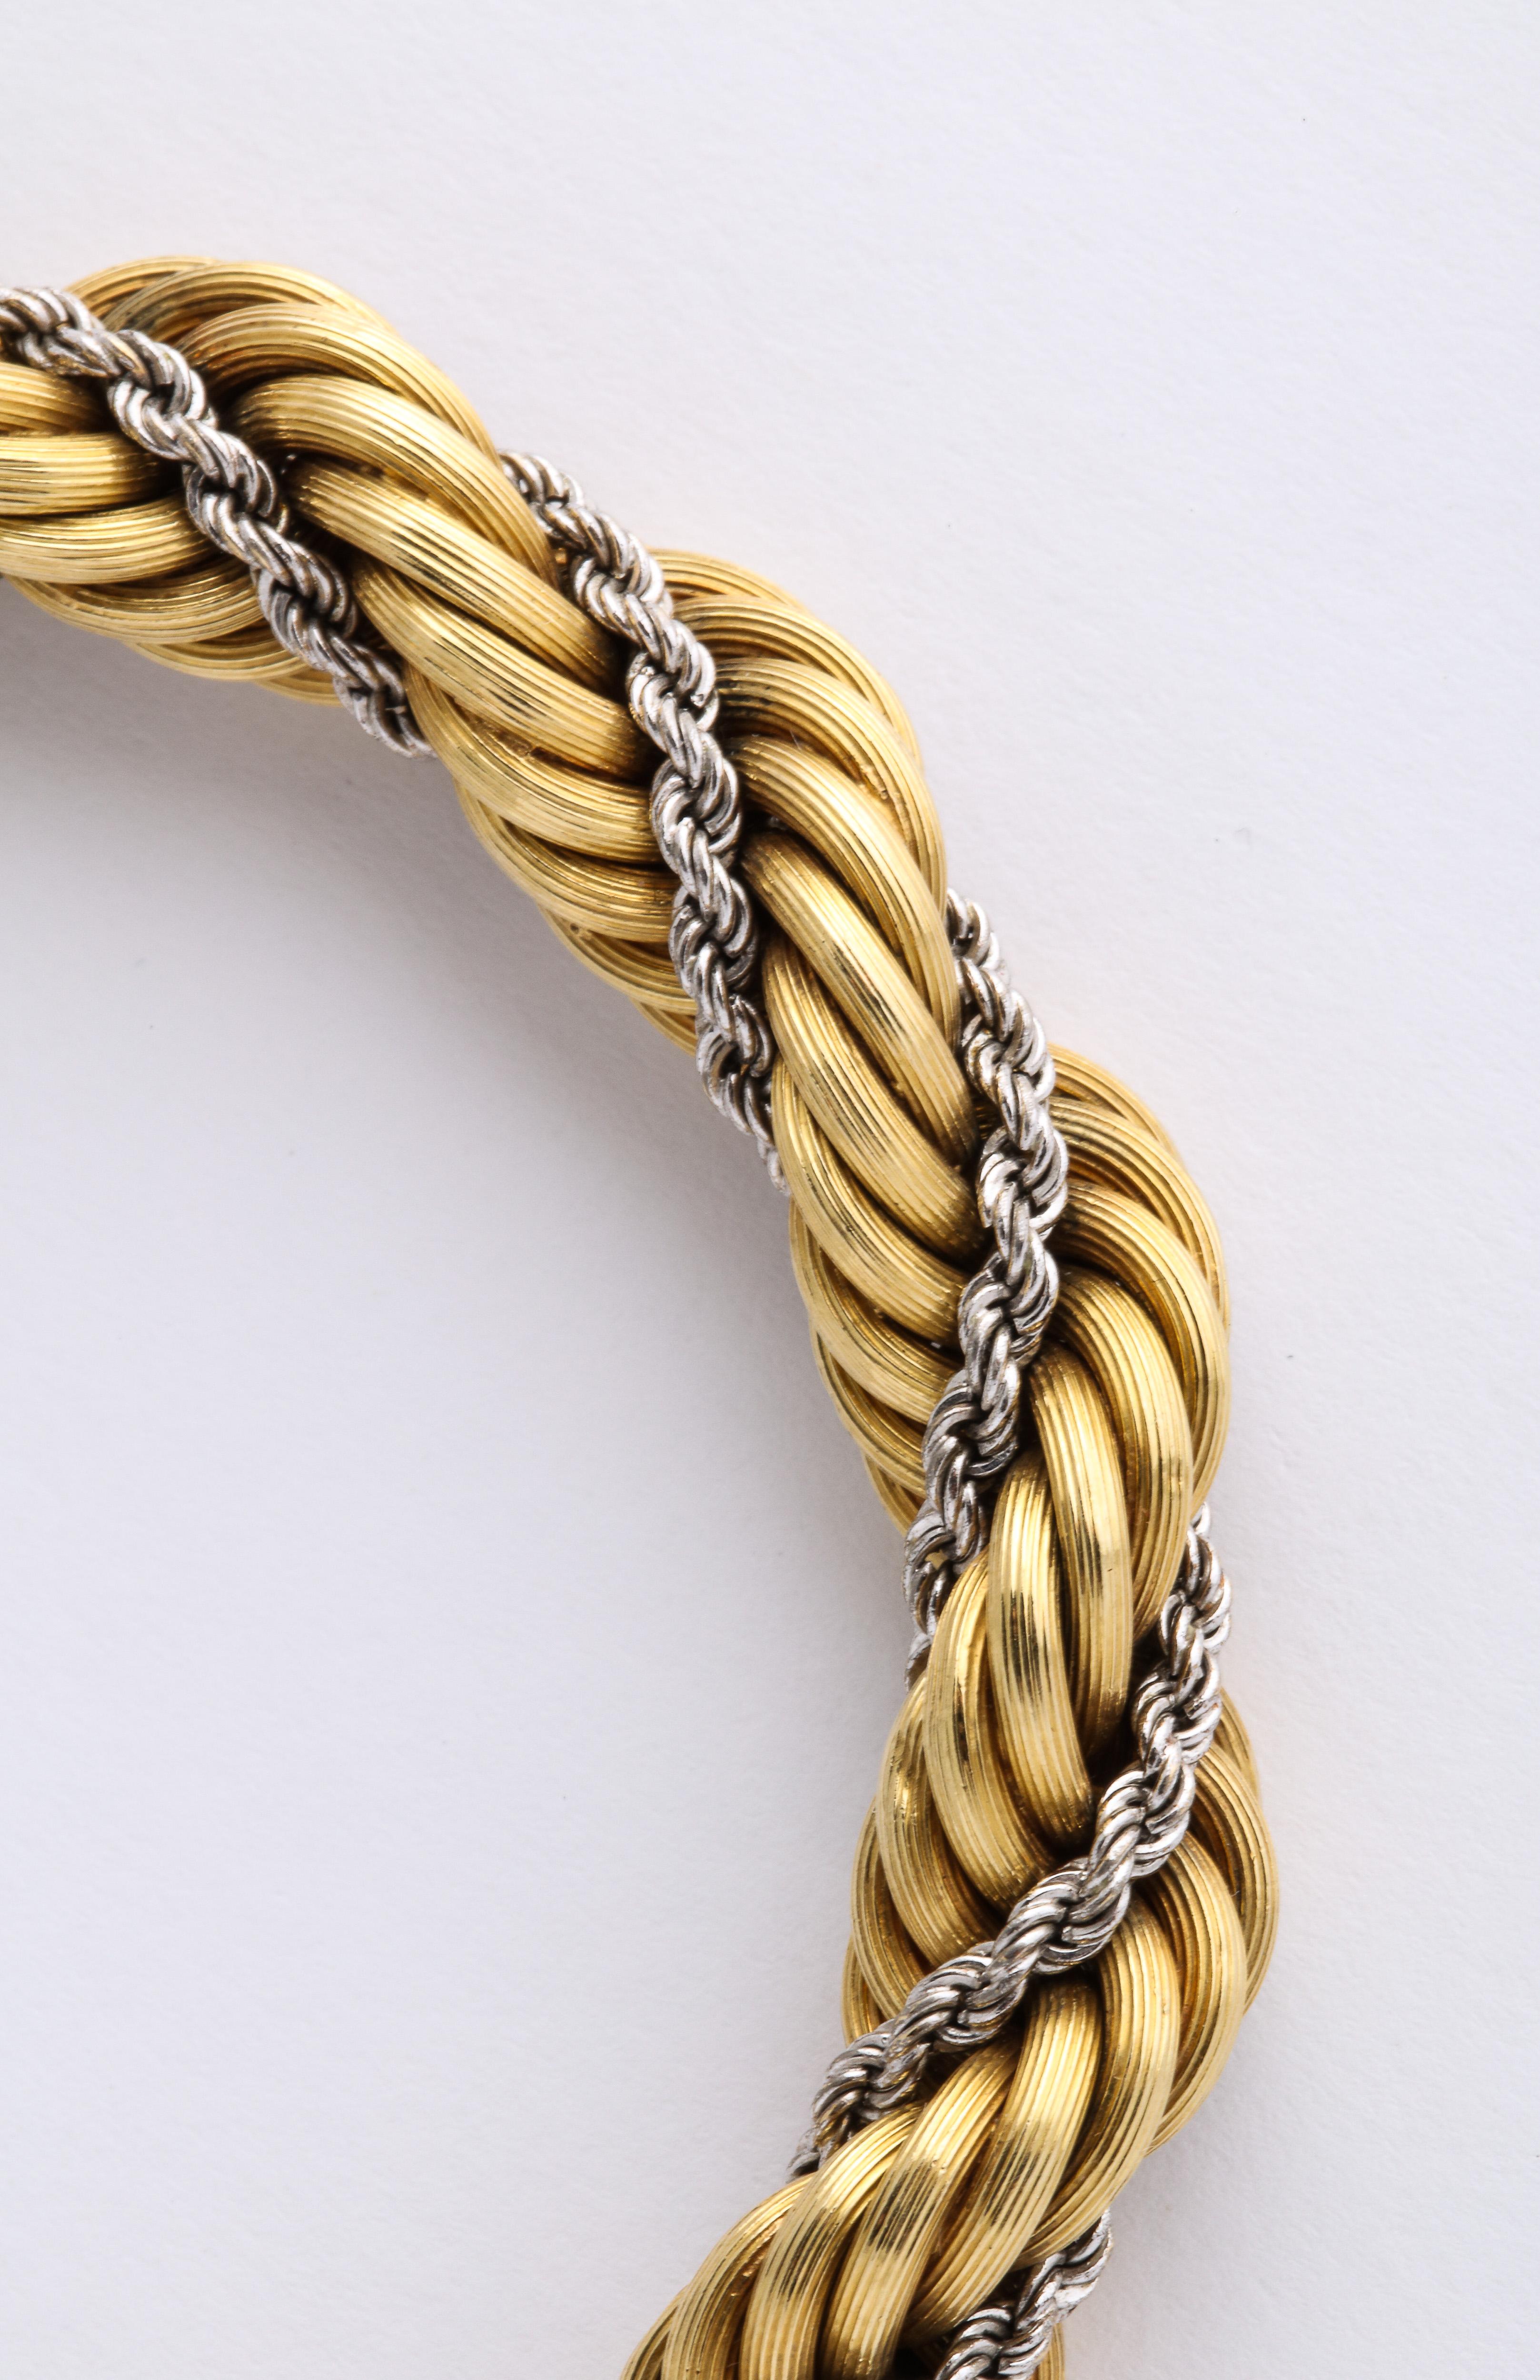 Rare 1950's Cartier Two Tone Gold Rope Twist Chain Bracelet w/ Box 
33 Grams 18k
Stamped 750
Stamped Cartier 18k Italy

